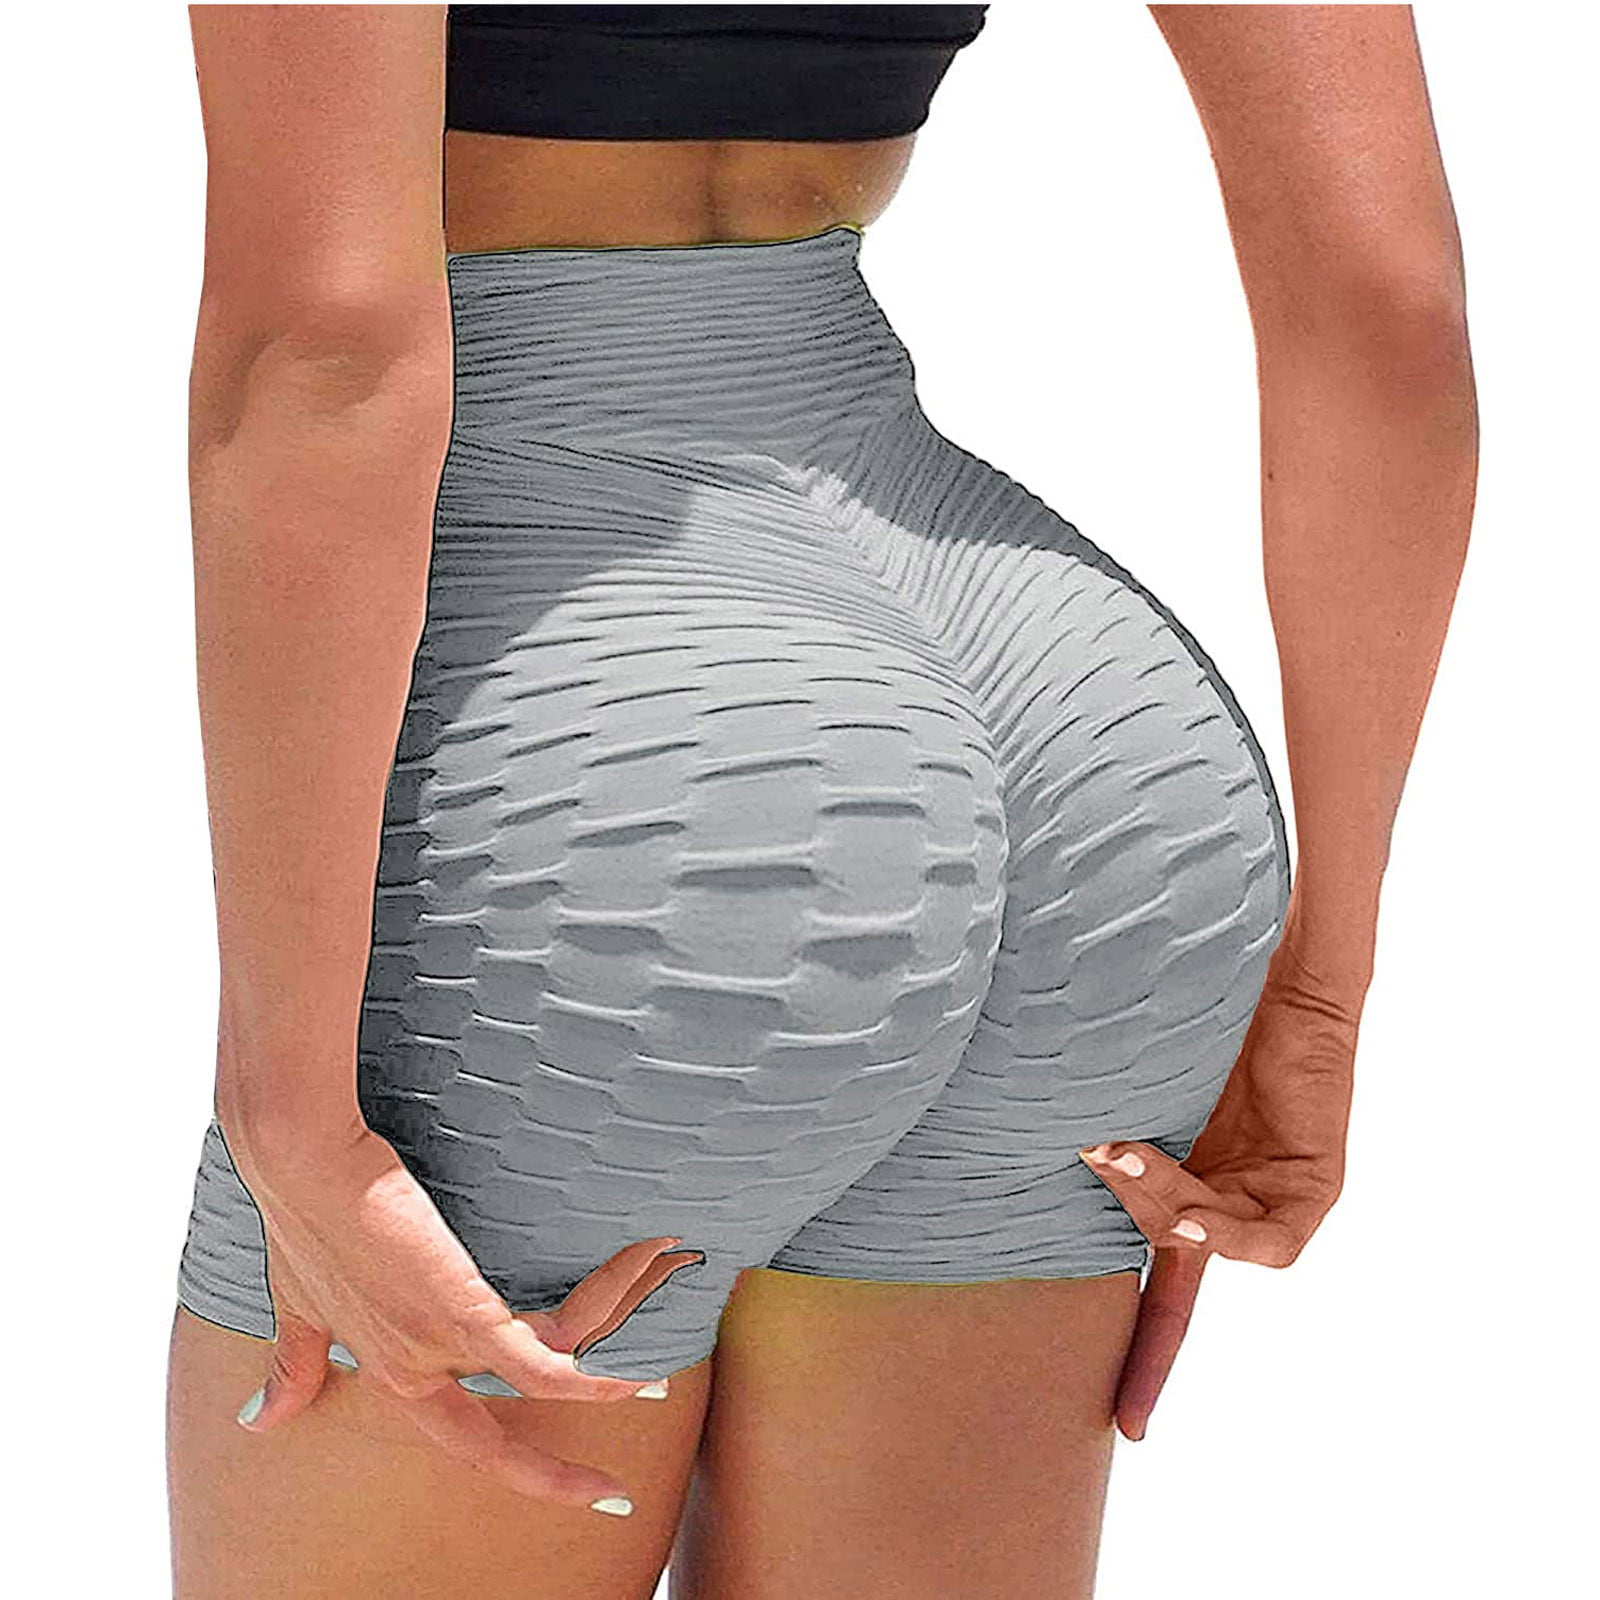 TOWED22 Yoga Shorts For Women,Women's Yoga Short Tummy Control Workout  Running Athletic Non See-Through Yoga Shorts with Hidden Pocket,Gray,Blue -  Walmart.com